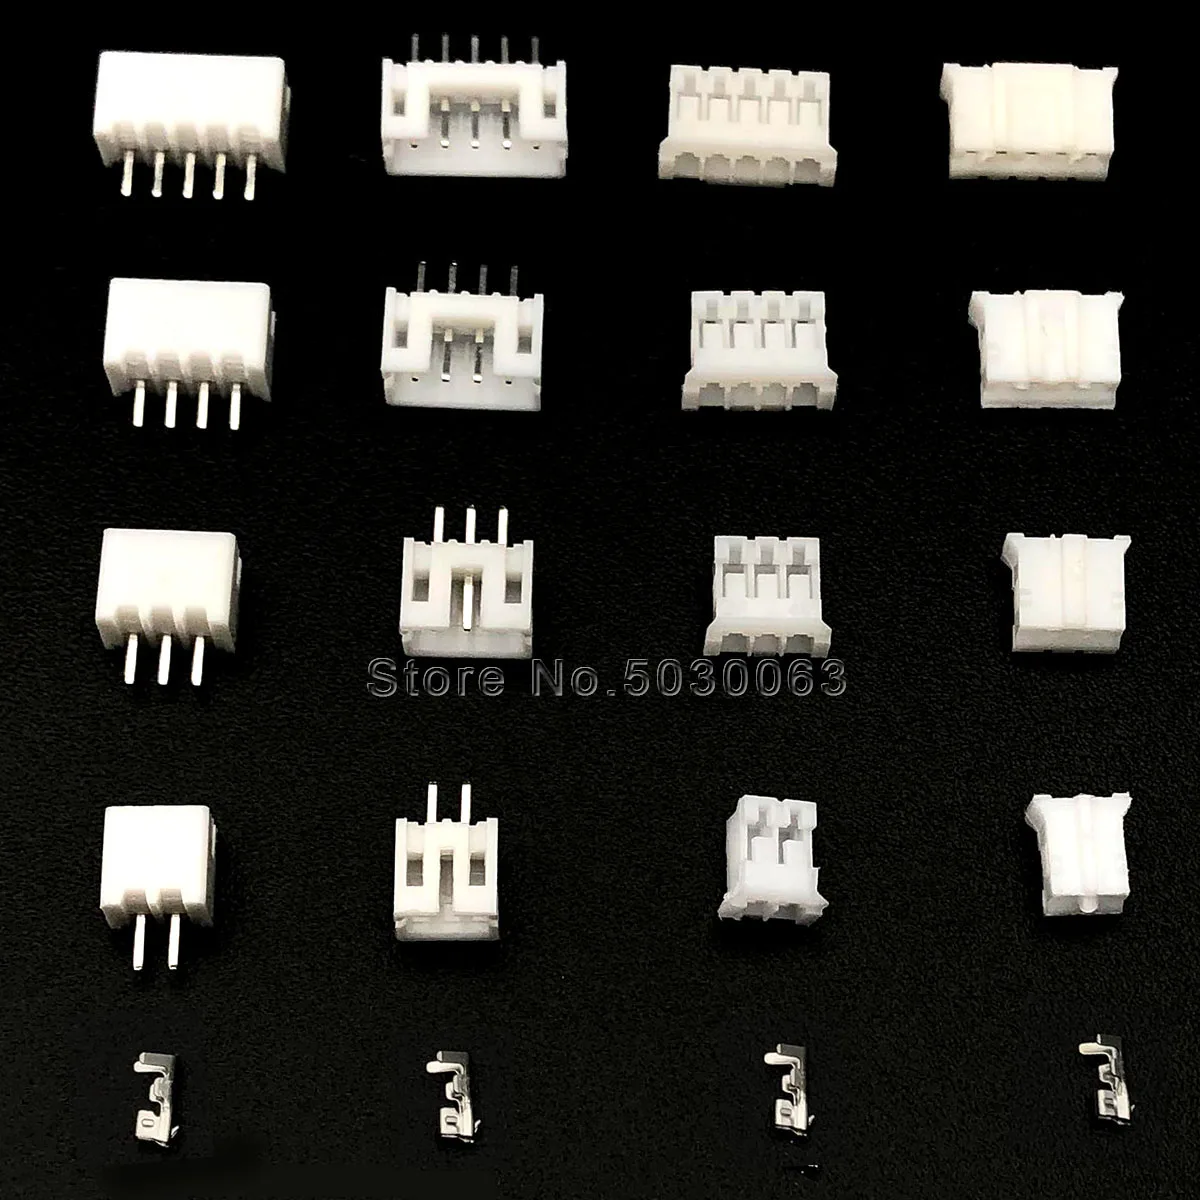 240pcs XH 2.54mm 2 3 4pin Right Angle Pitch Terminal Housing Header Connector 